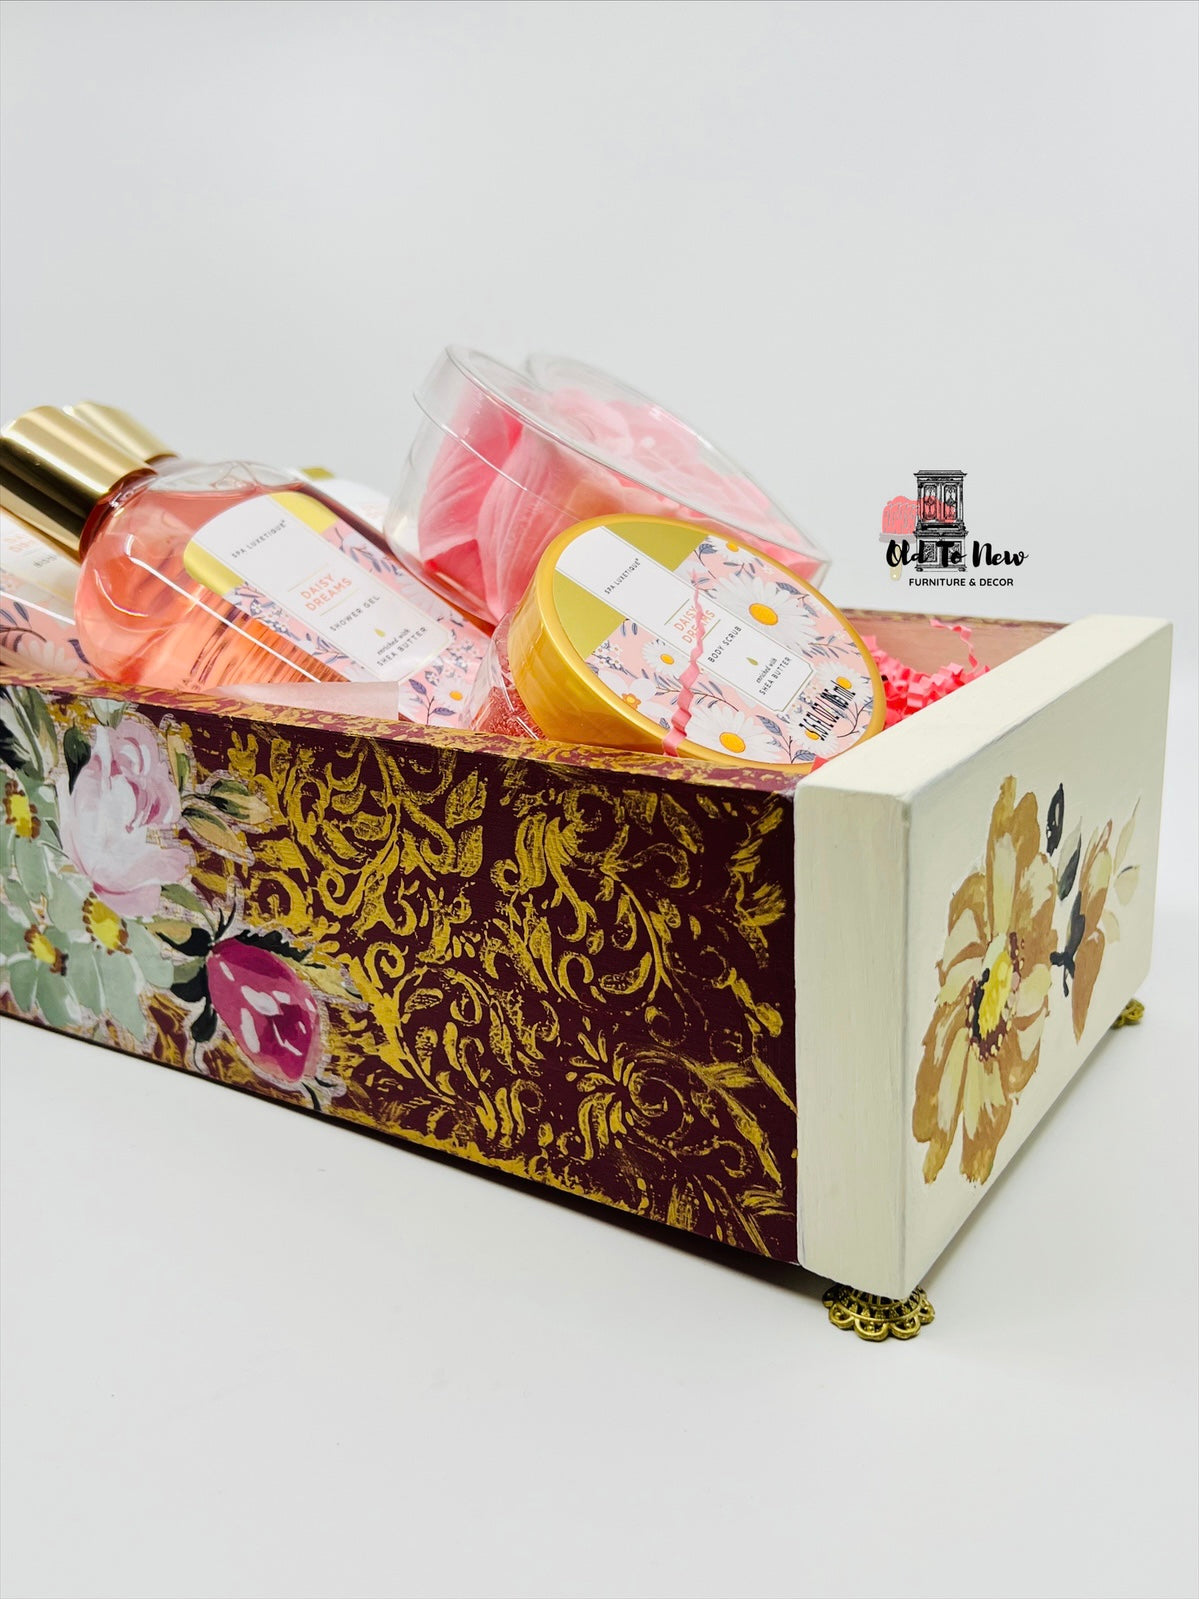 Pink and Gold Gift Box, Spa Gift Set, Mothers Day Gift, Birthday Gift, Anniversary Gift, Get Well Soon Gift, A gift for her, A Gift for She, Old to New Furniture & Decor